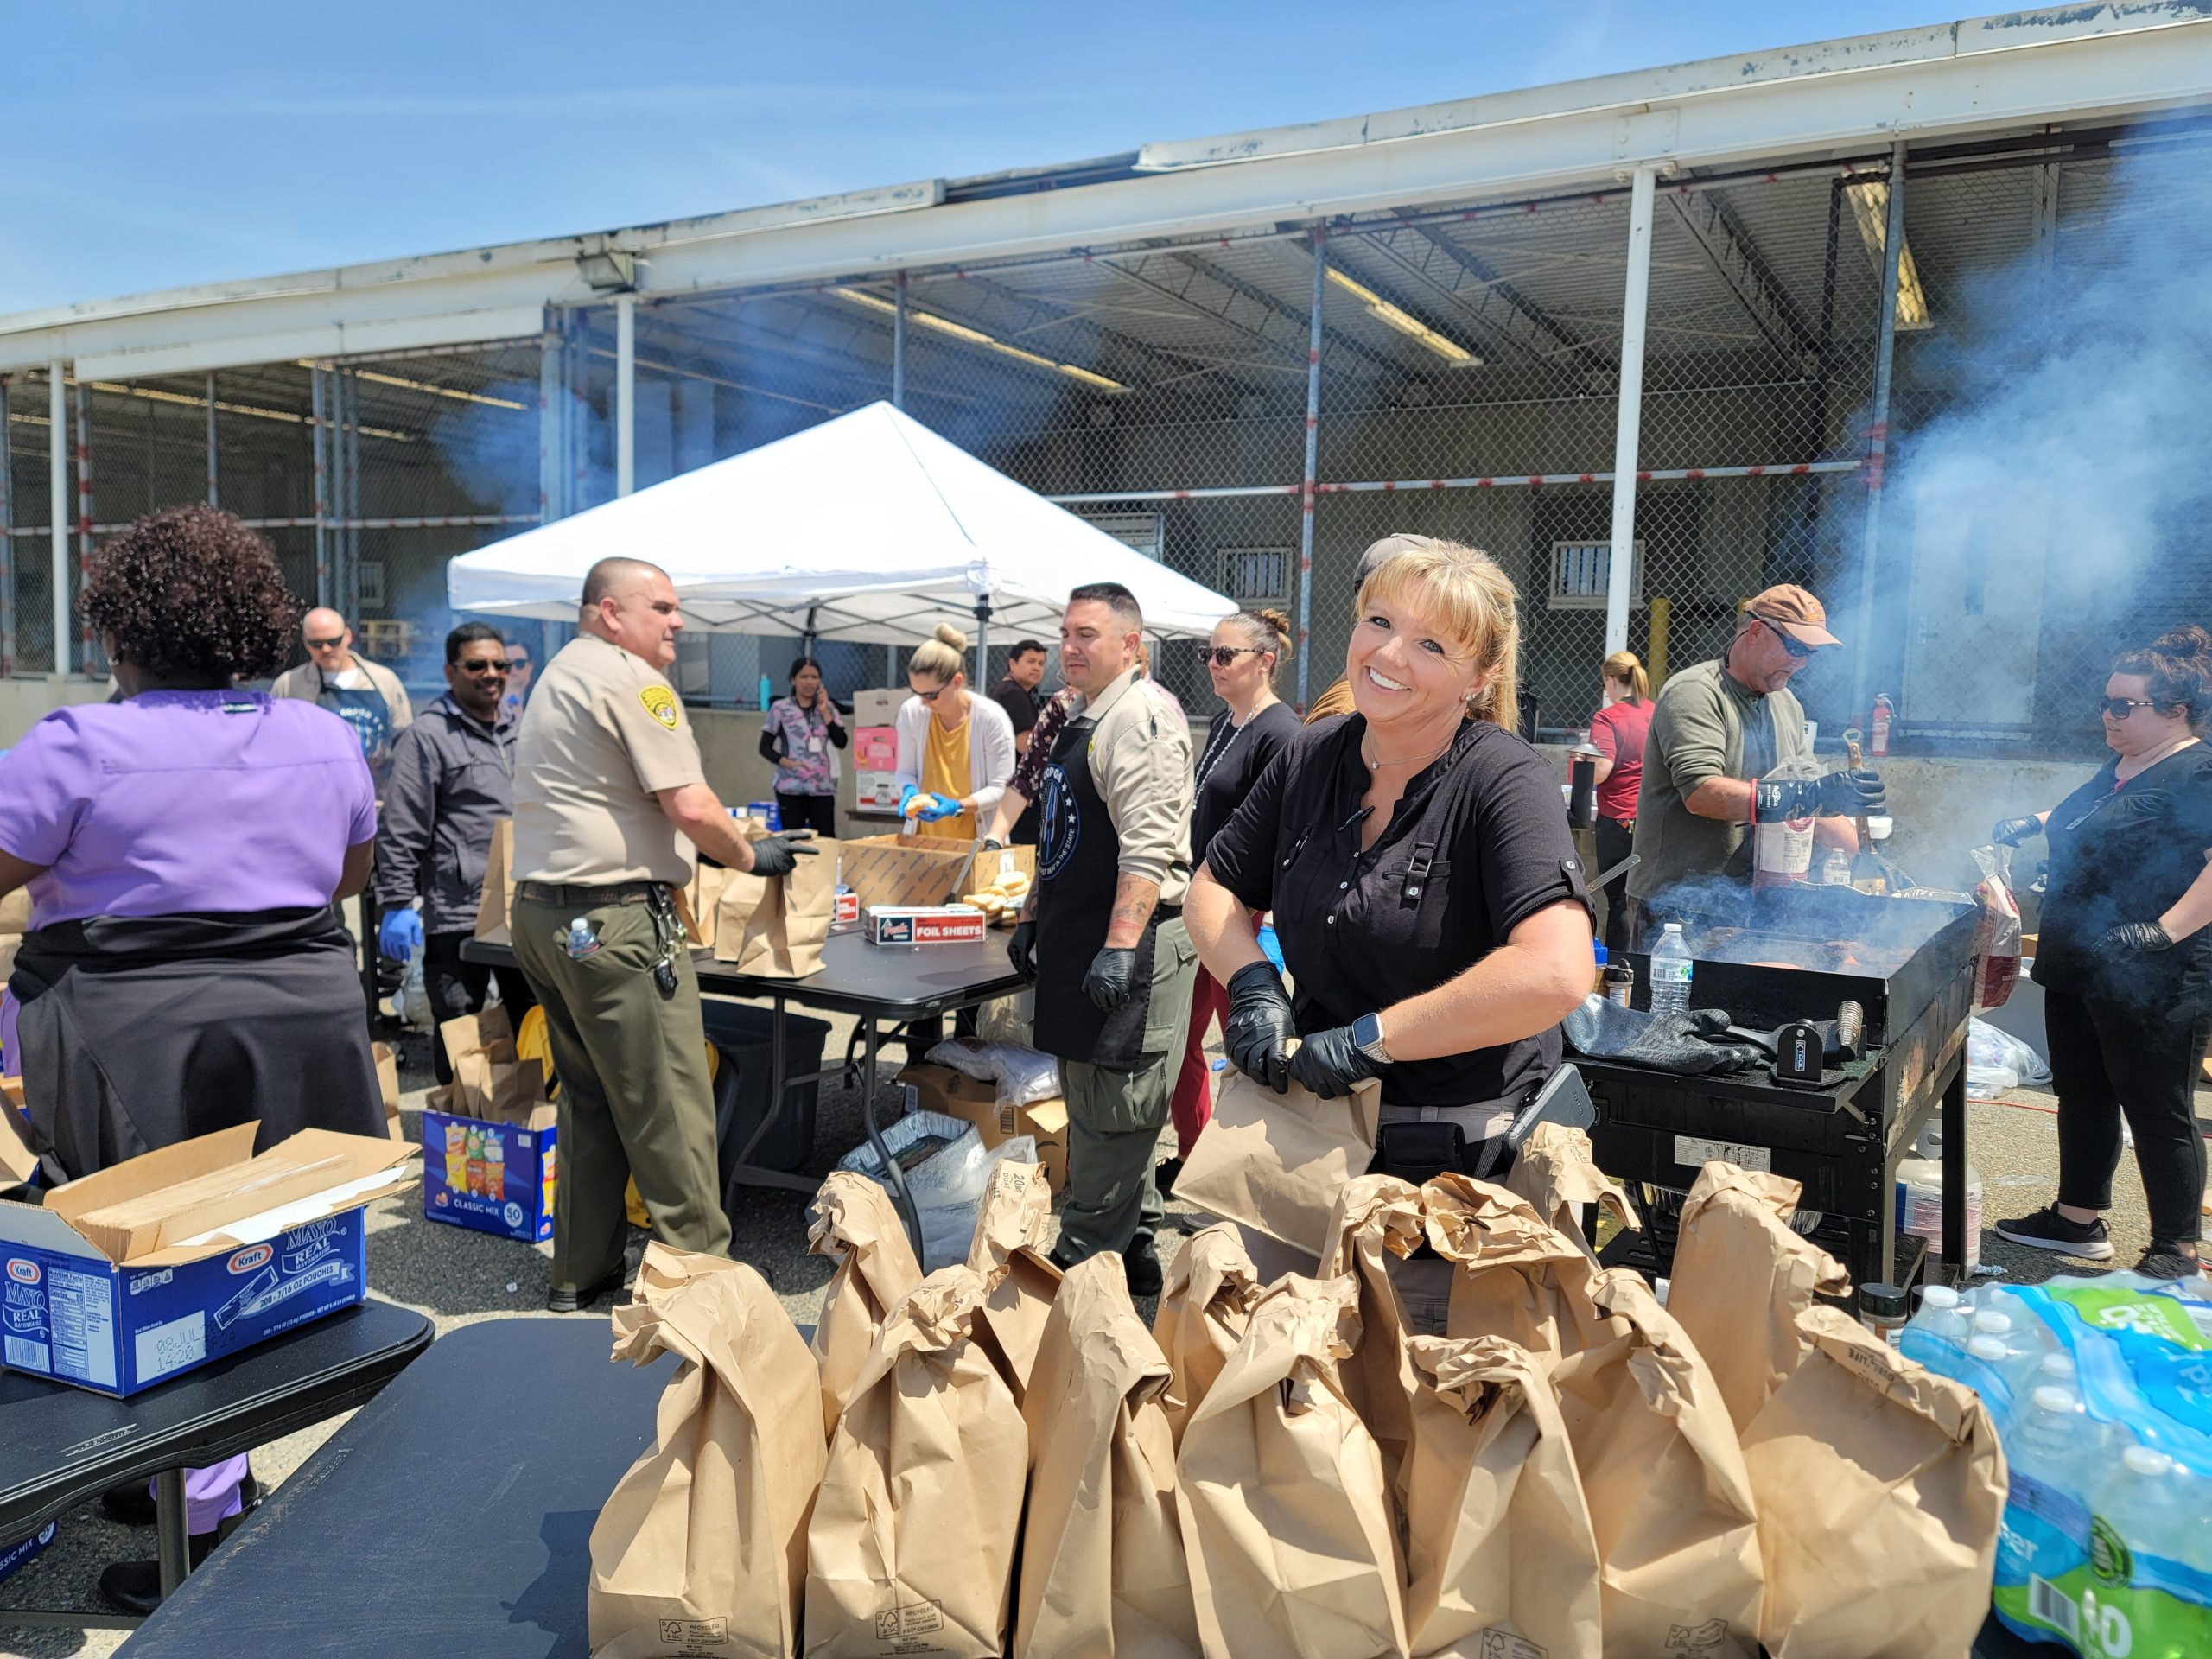 Prison staff working a grill and bagging food for employees.